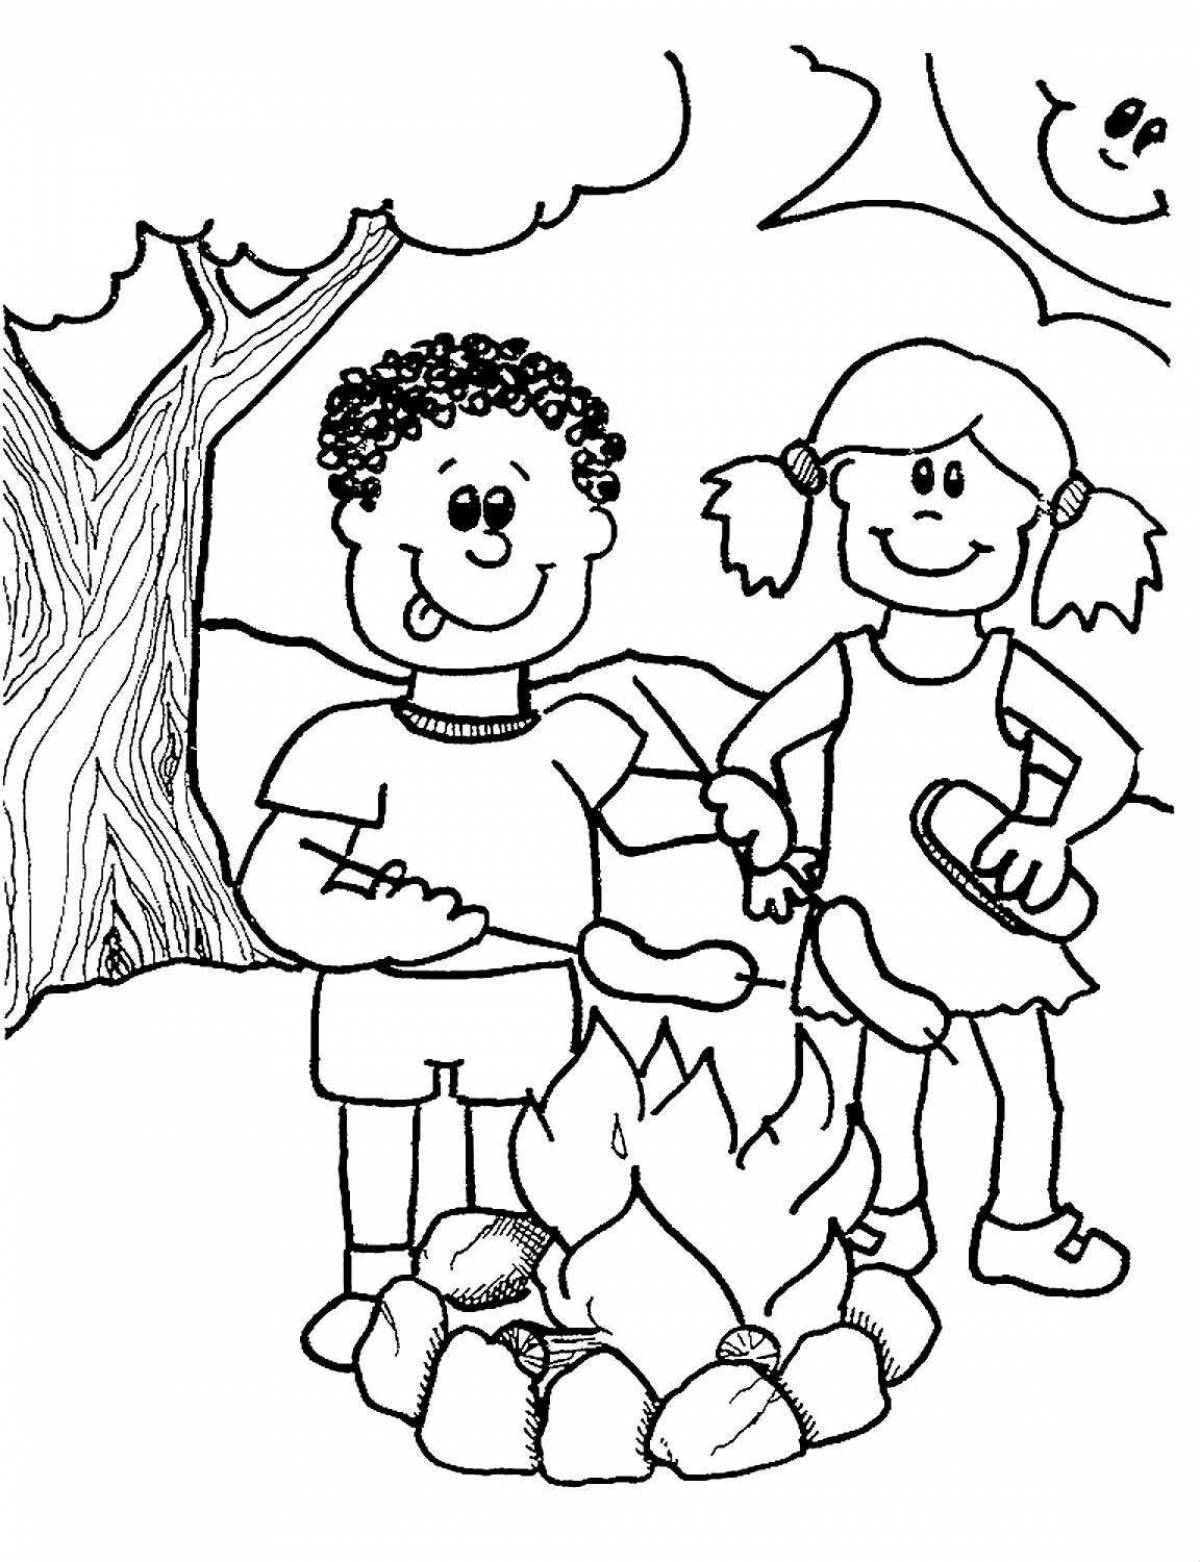 Coloring page playful fiery friend